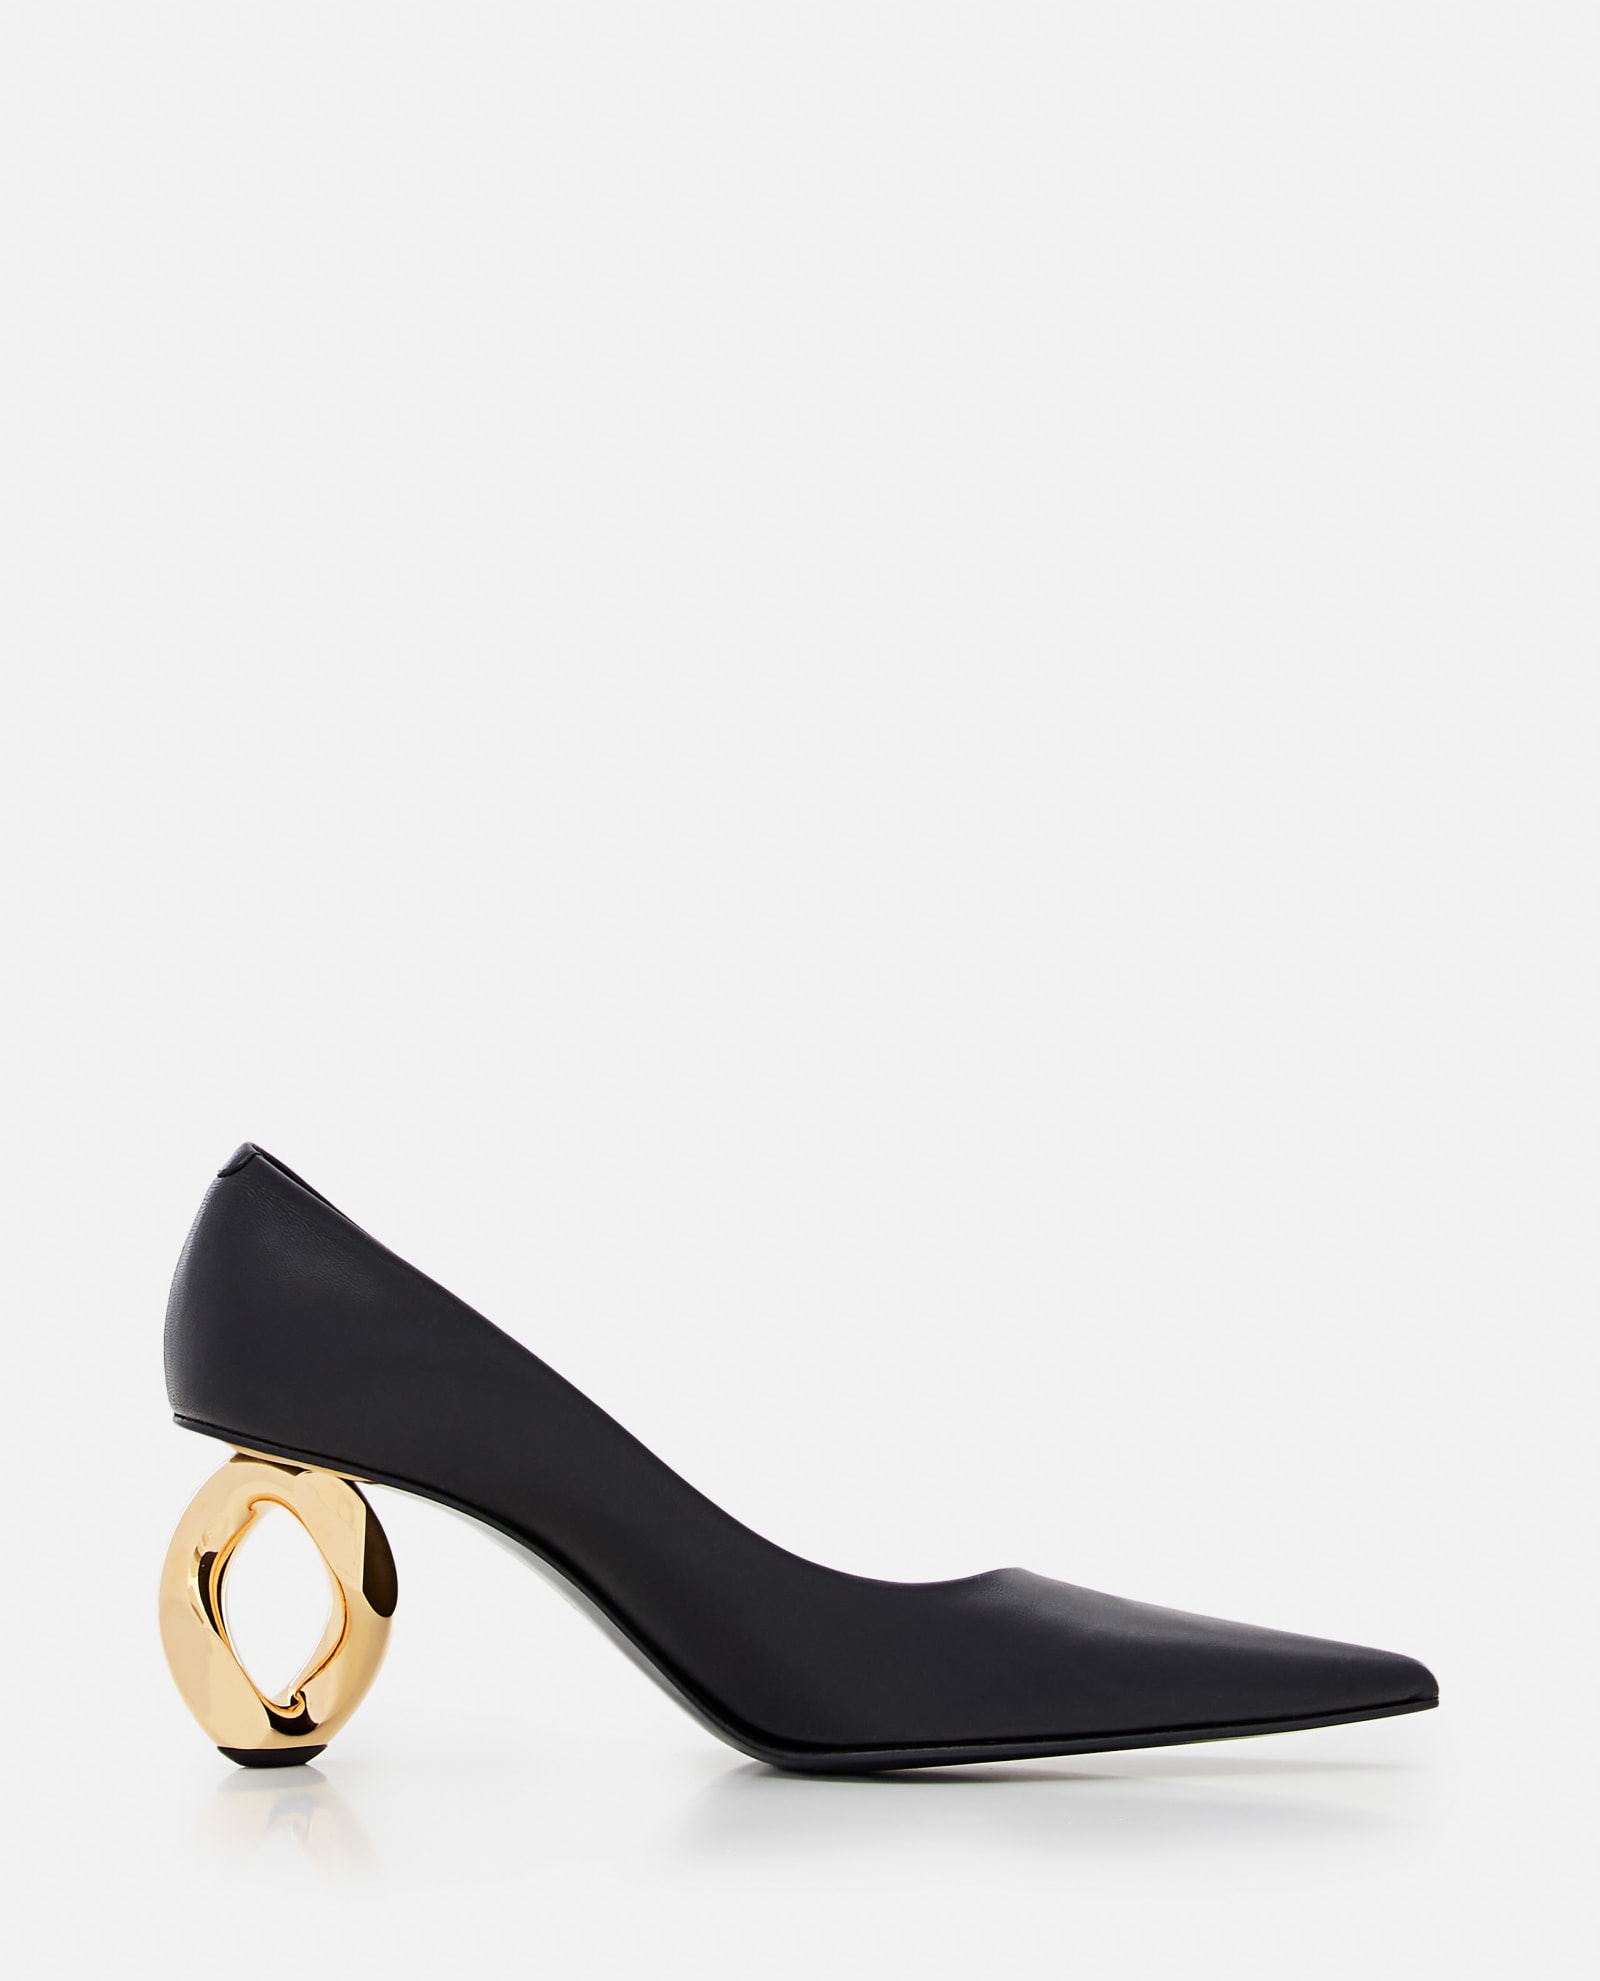 JW ANDERSON 75MM CHAIN HEEL LEATHER PUMPS